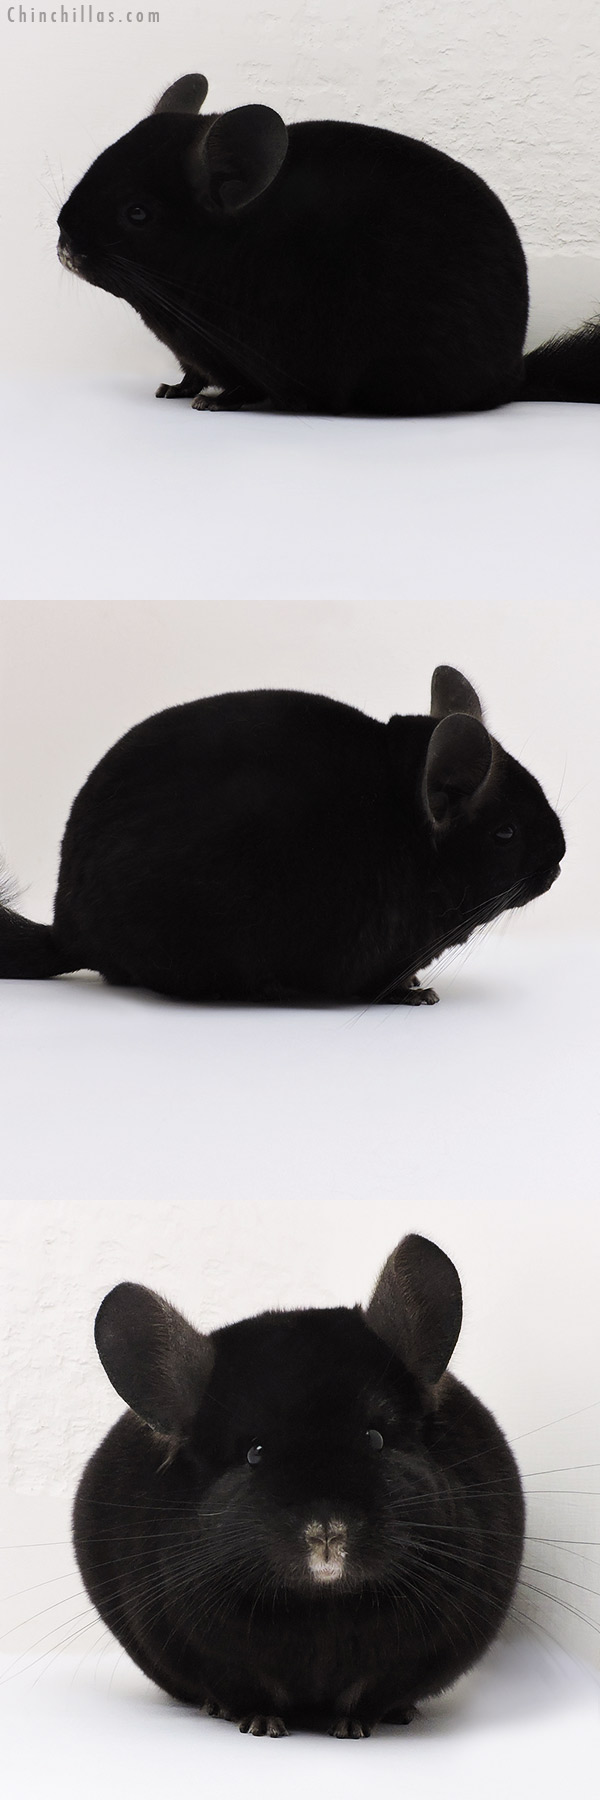 Chinchilla or related item offered for sale or export on Chinchillas.com - 17196 Show Quality Ebony Female Chinchilla